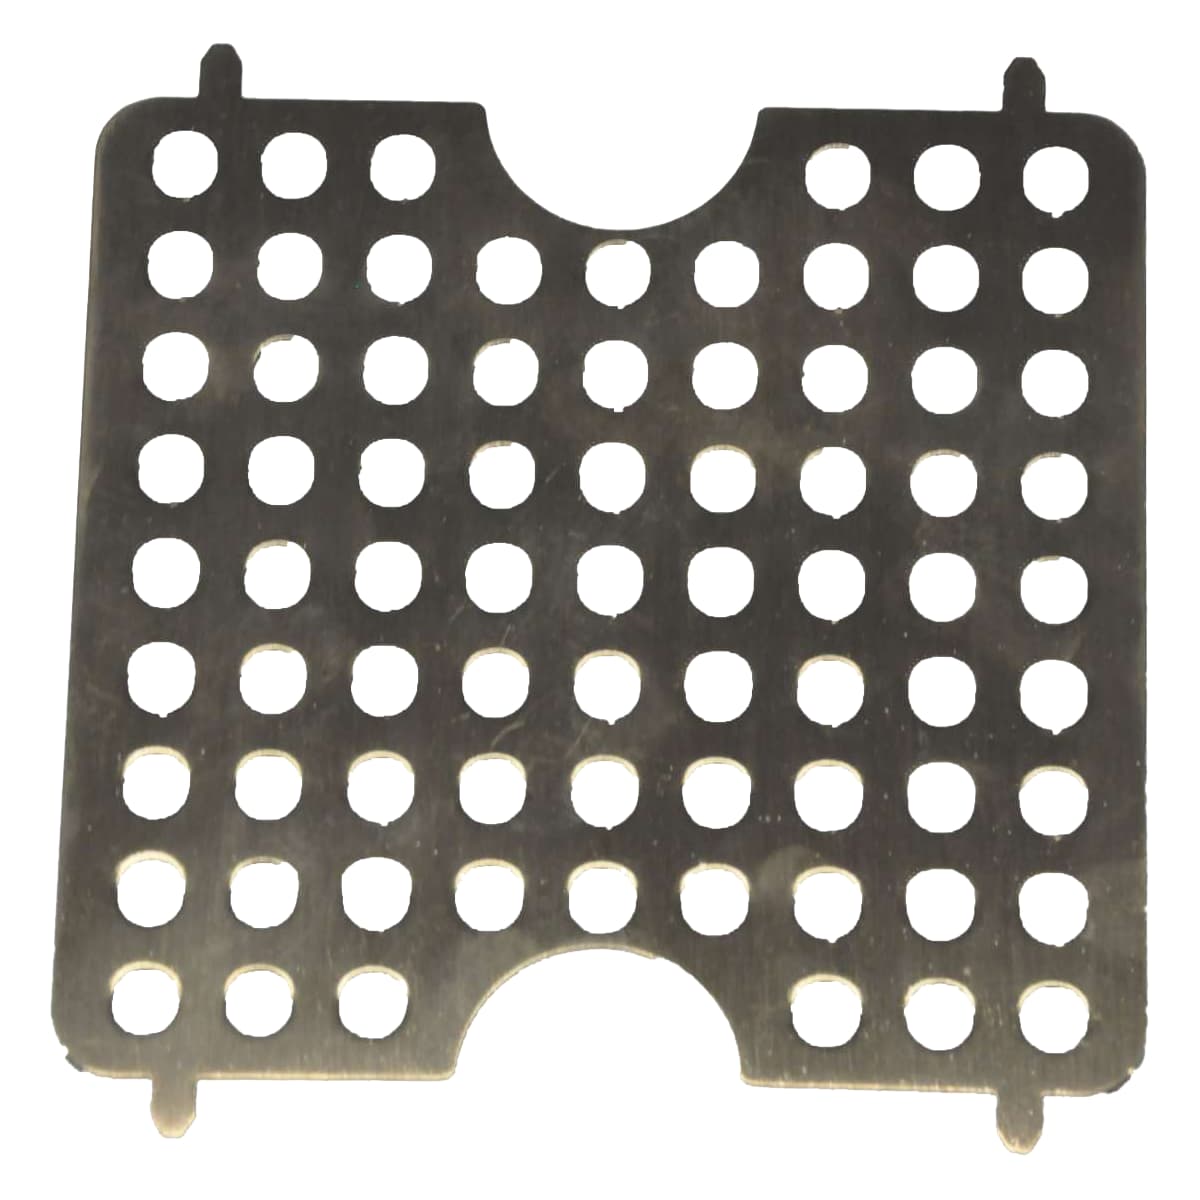 Universal Grate for Bushbox LF